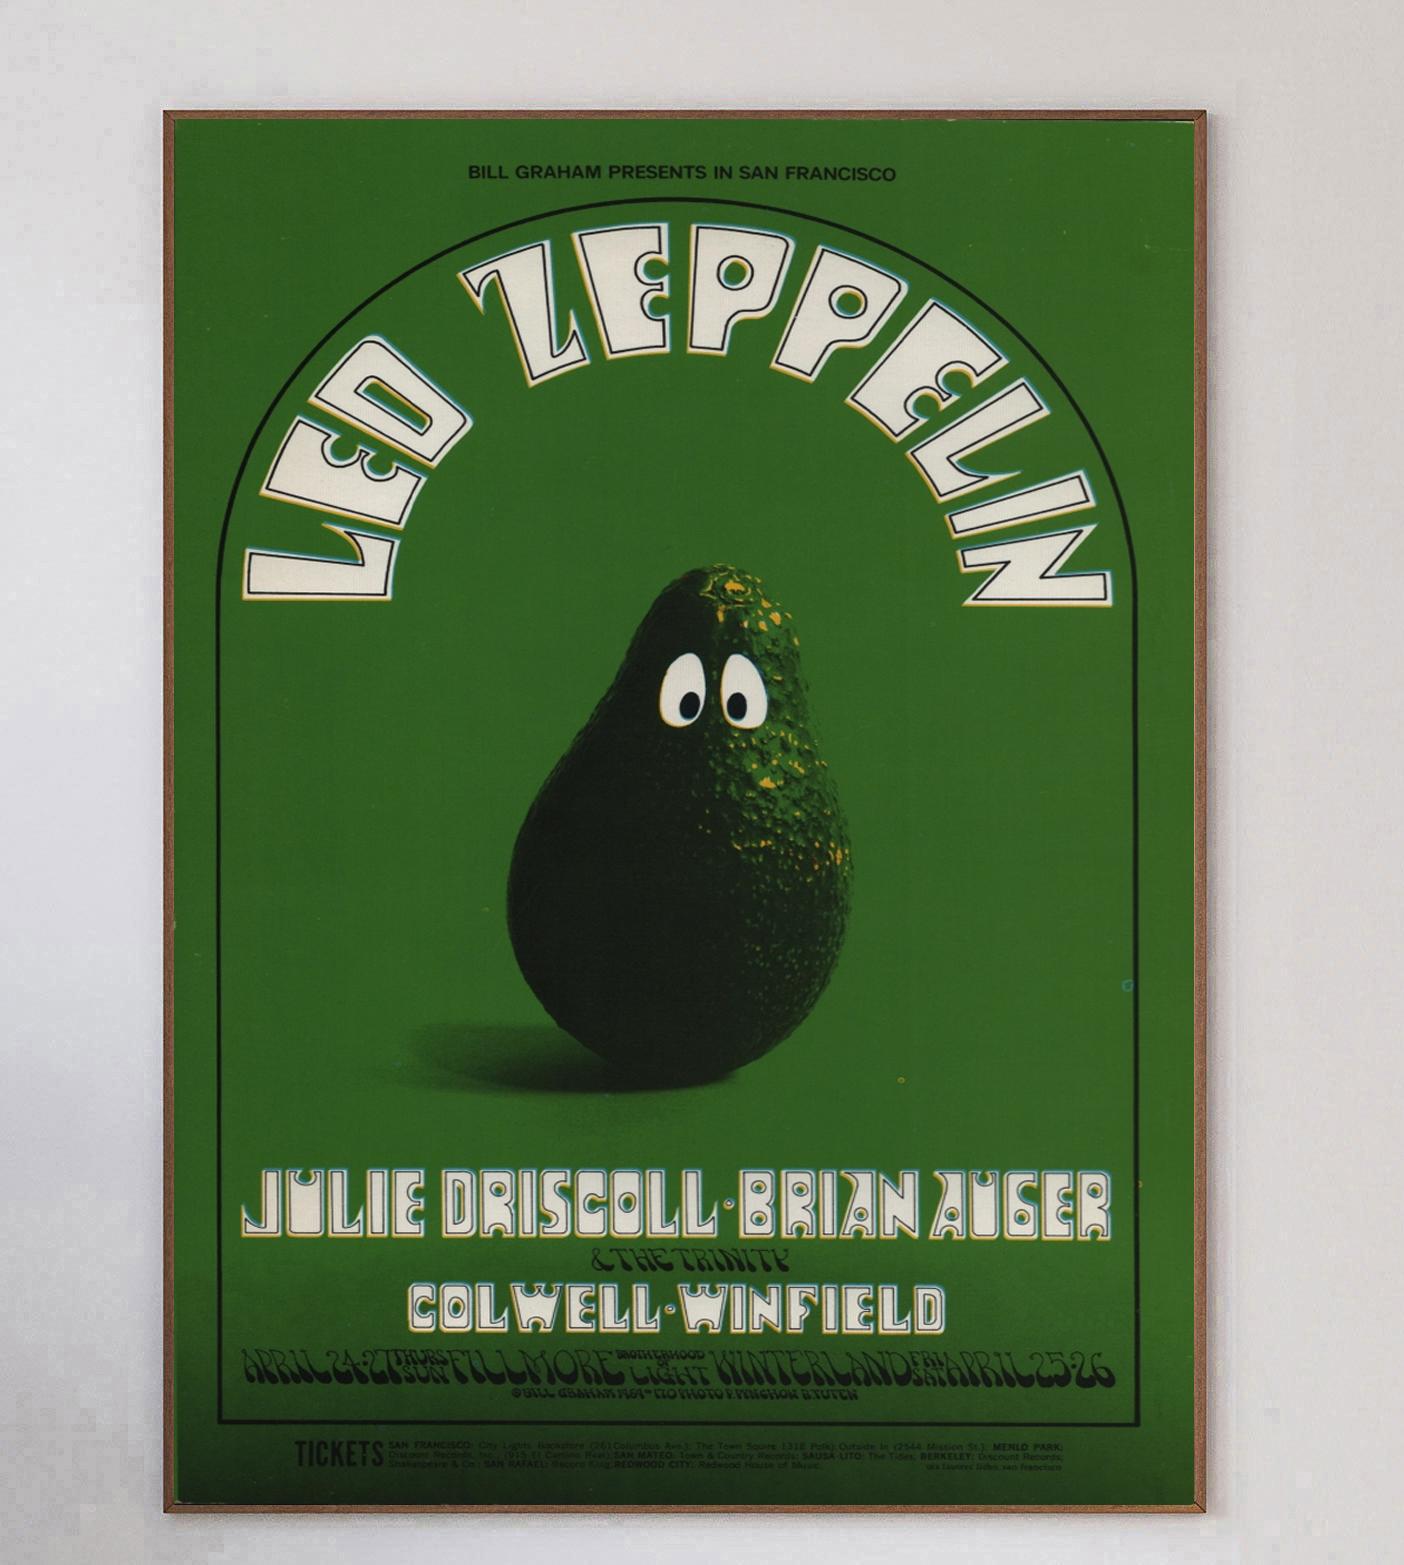 Designed by the legendary concert poster artist Randy Tuten with Peter Pynchon, this beautiful poster was created in 1969 to promote a live concert of Led Zeppelin at the world famous Fillmore in San Francisco. Bill Graham events such as this were